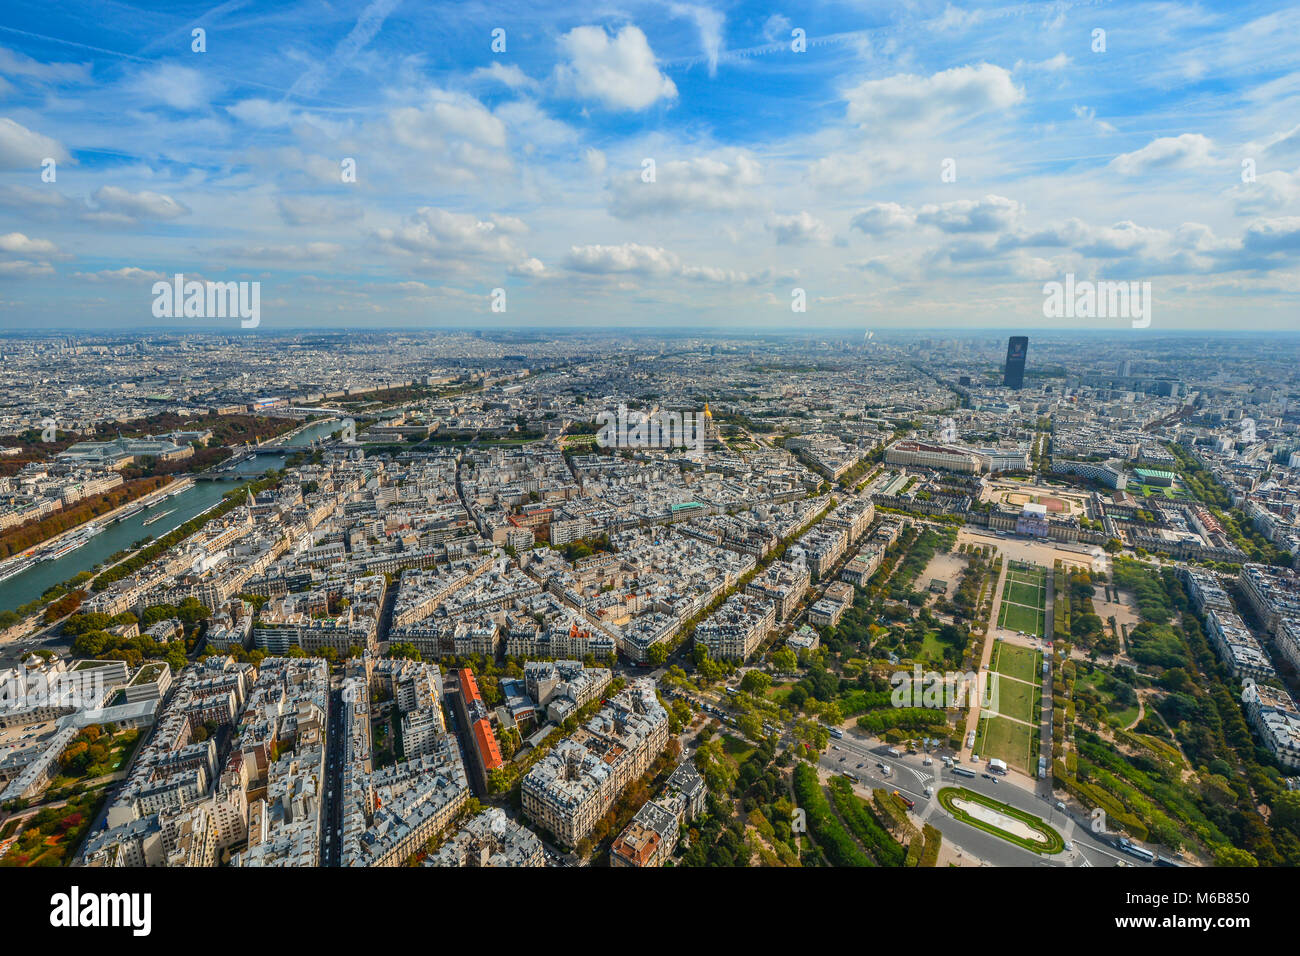 A view of Paris France from the Eiffel Tower in early autumn with the Seine, Champ du Mars, and Montparnasse Tower in view on a sunny day Stock Photo